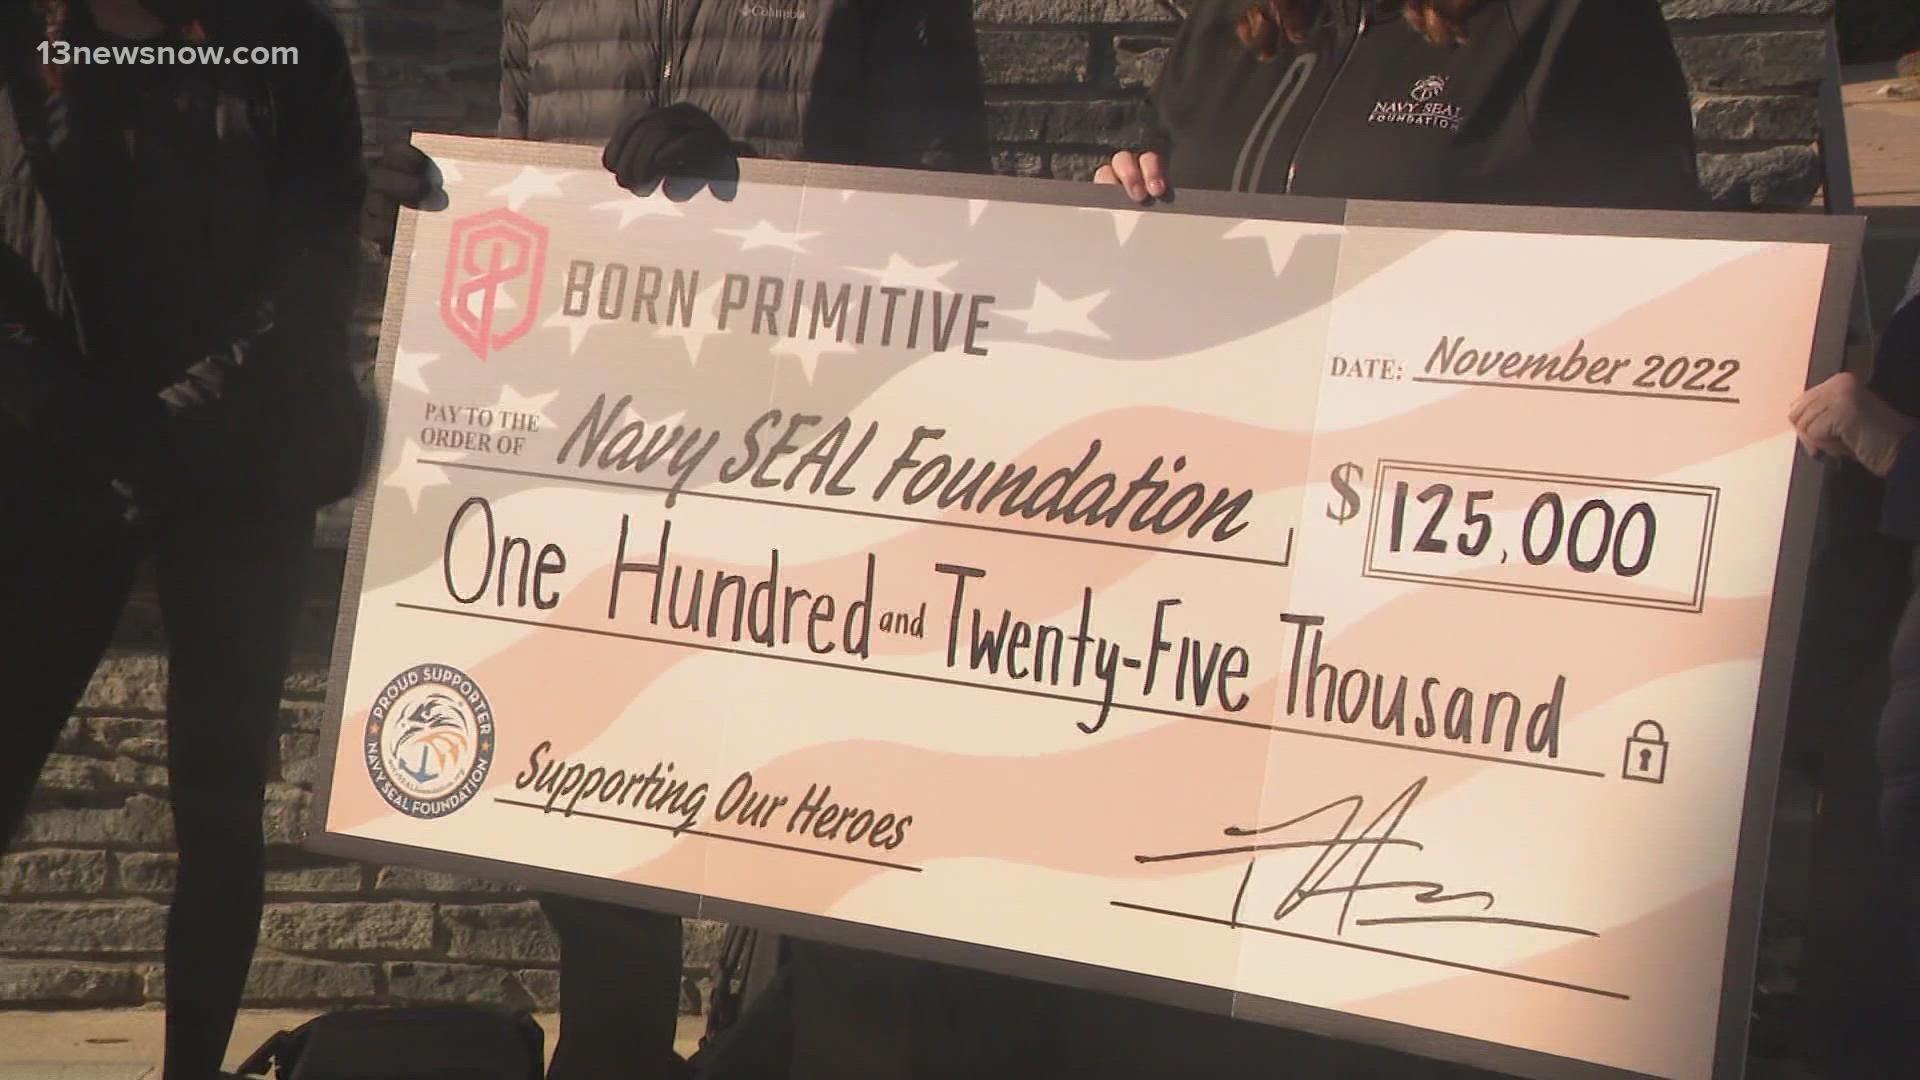 The $125,000 donation from retailer 'Born Primitive' was given in recognition of Veterans Day